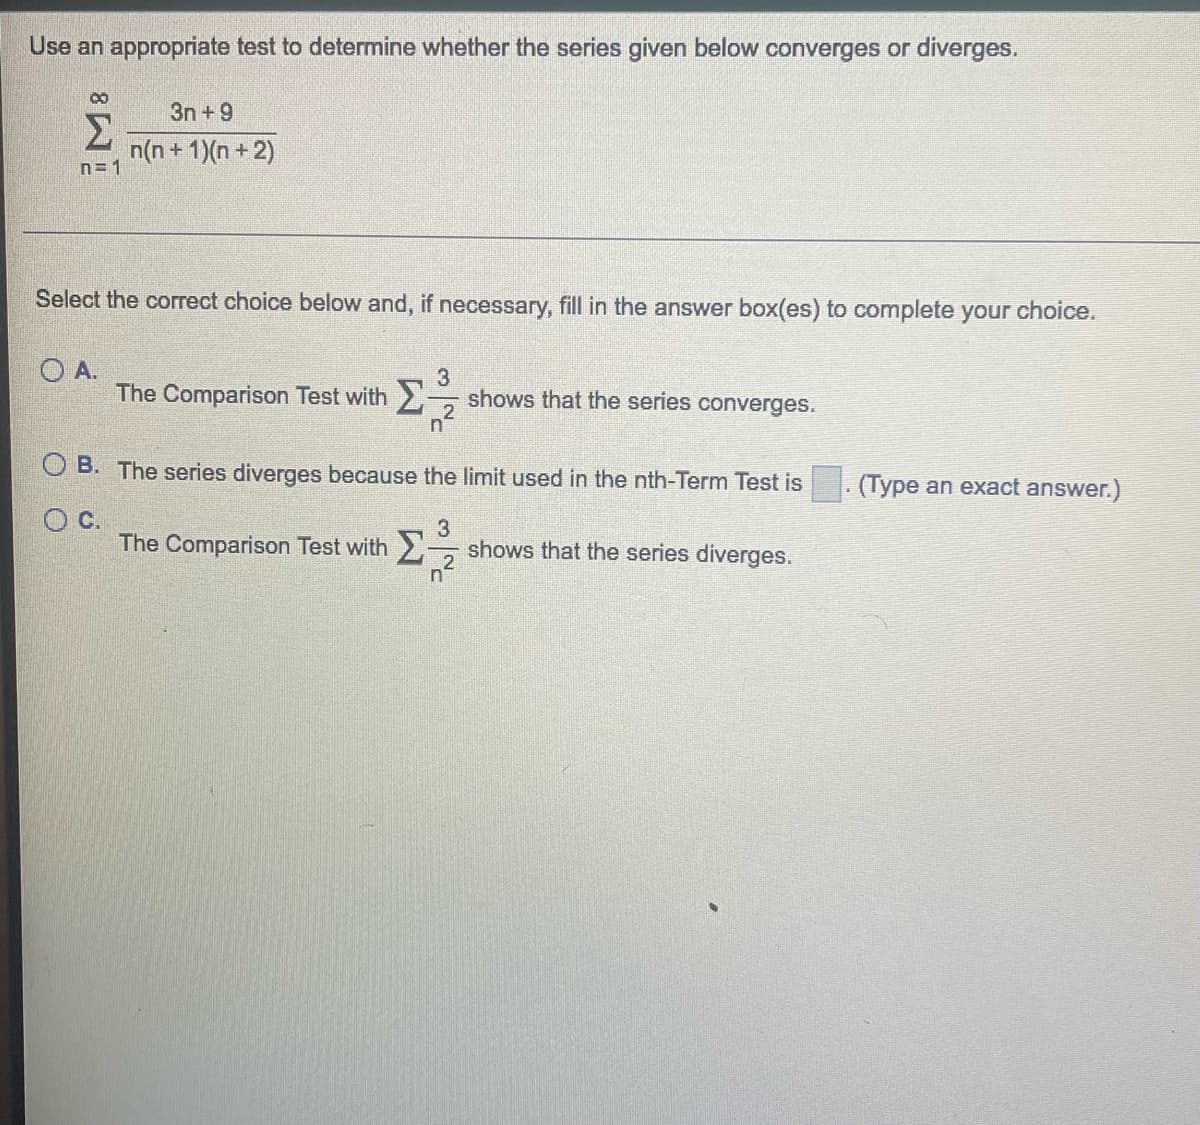 Use an appropriate test to determine whether the series given below converges or diverges.
00
Σ
n=1
3n+9
n(n+1)(n+2)
Select the correct choice below and, if necessary, fill in the answer box(es) to complete your choice.
OA.
3
The Comparison Test with shows that the series converges.
2
n
B. The series diverges because the limit used in the nth-Term Test is
OC.
3
The Comparison Test with Σ-
n
2
shows that the series diverges.
.
(Type an exact answer.)